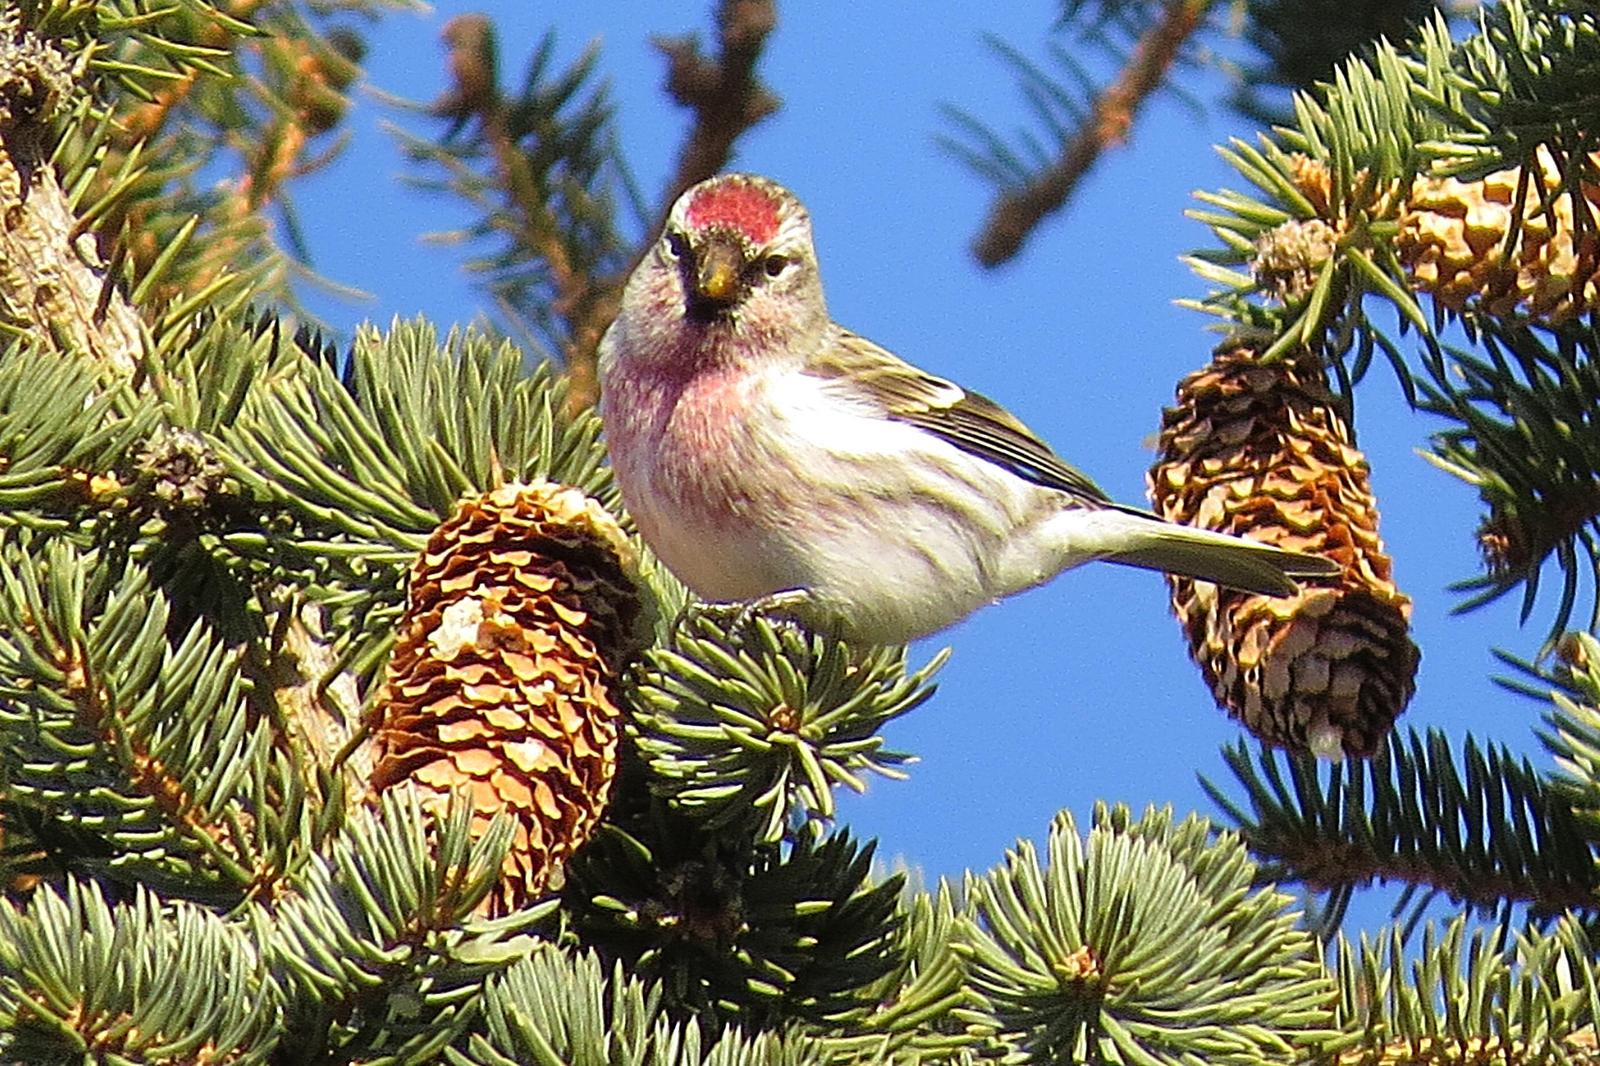 Common Redpoll Photo by Enid Bachman